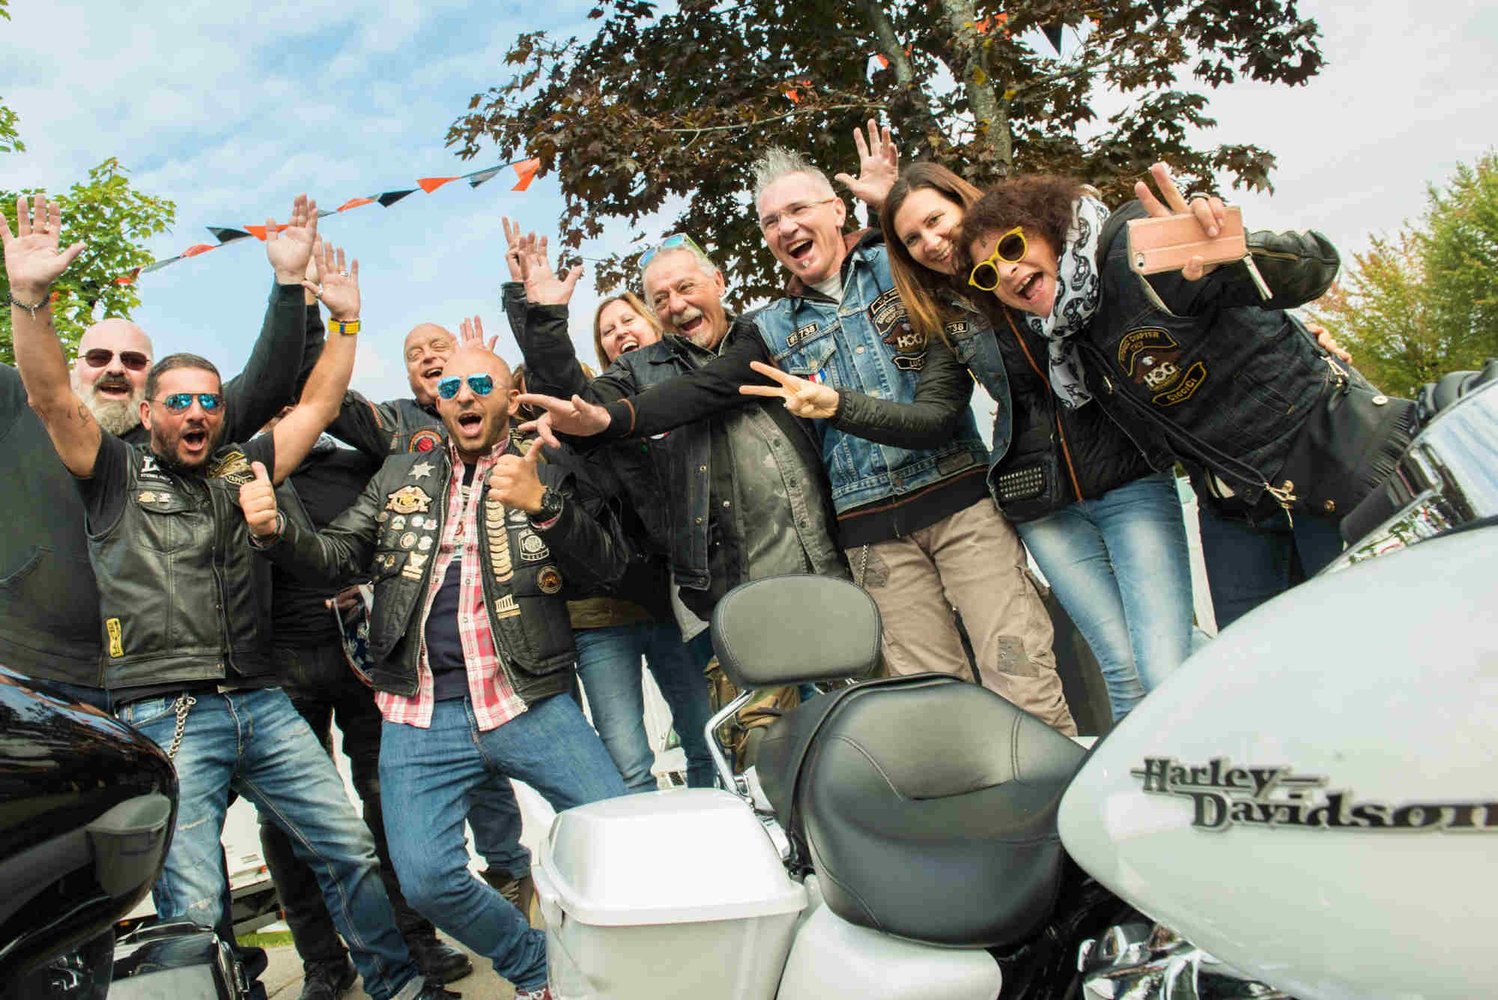 Group of cheering Harley-Davidson fans